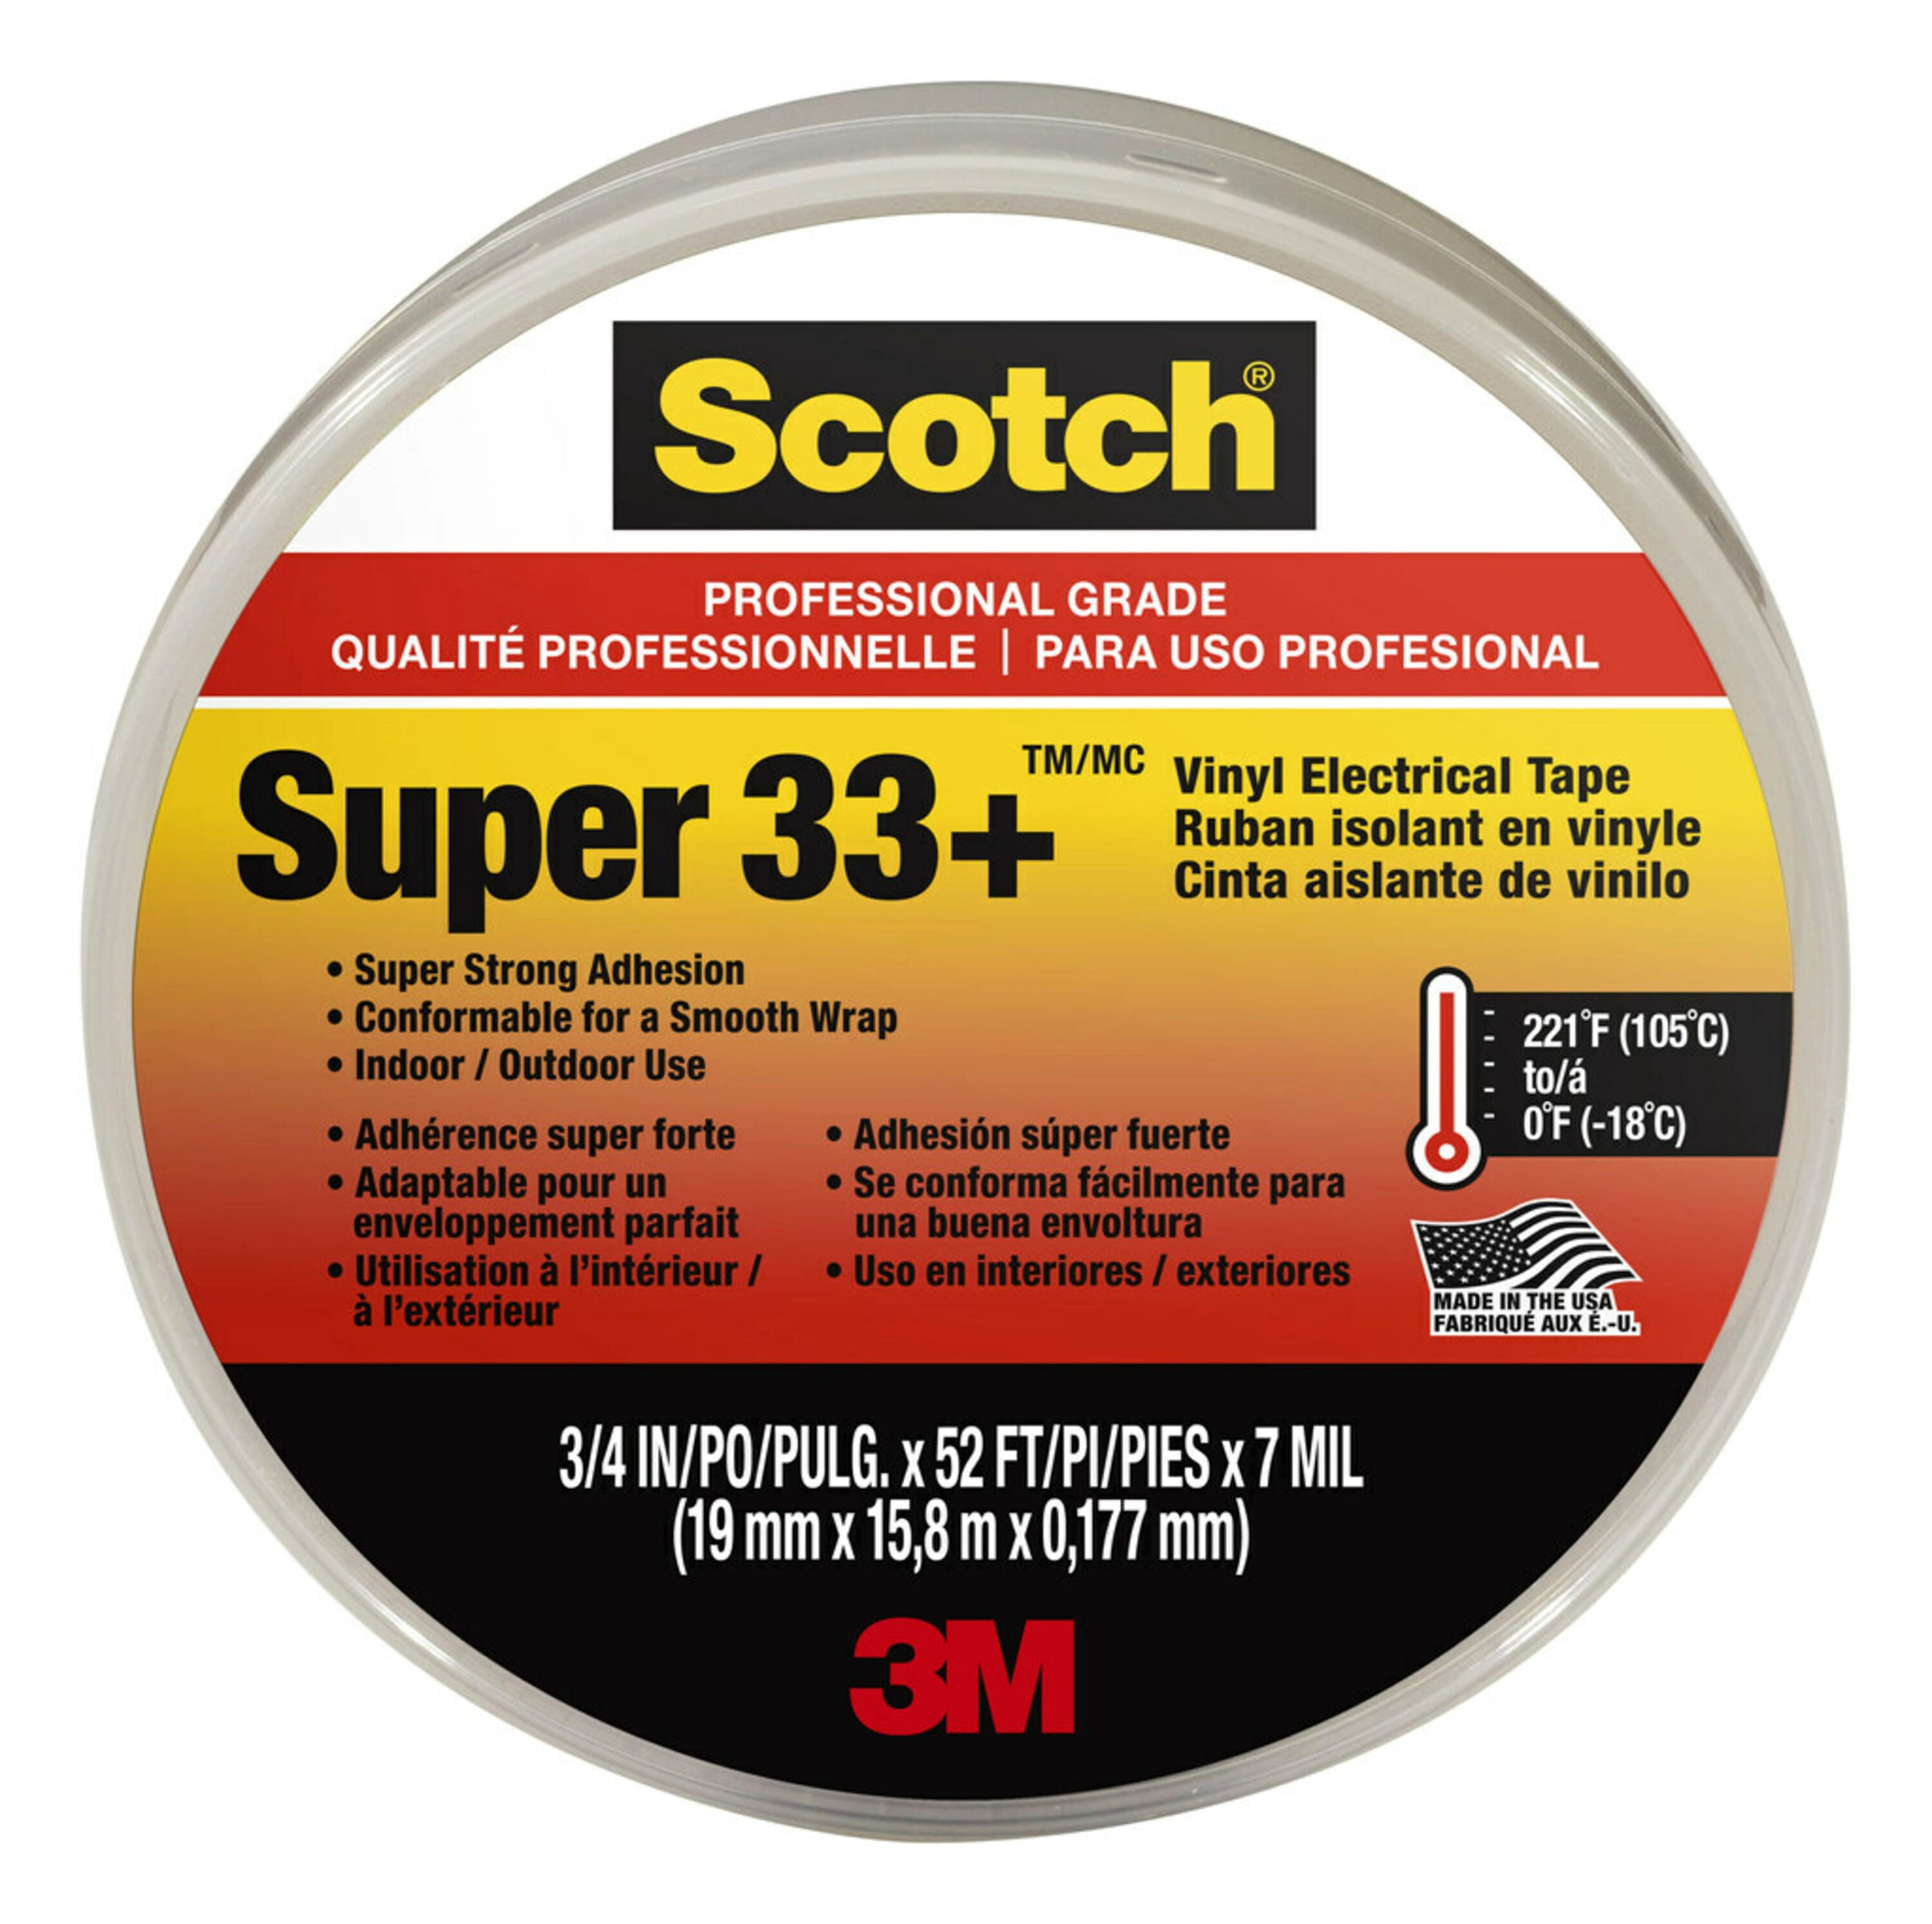 3M Scotch Super 33 Plus Vinyl Electrical Tape 0.75-Inch by 200-Inch Pack of 3 